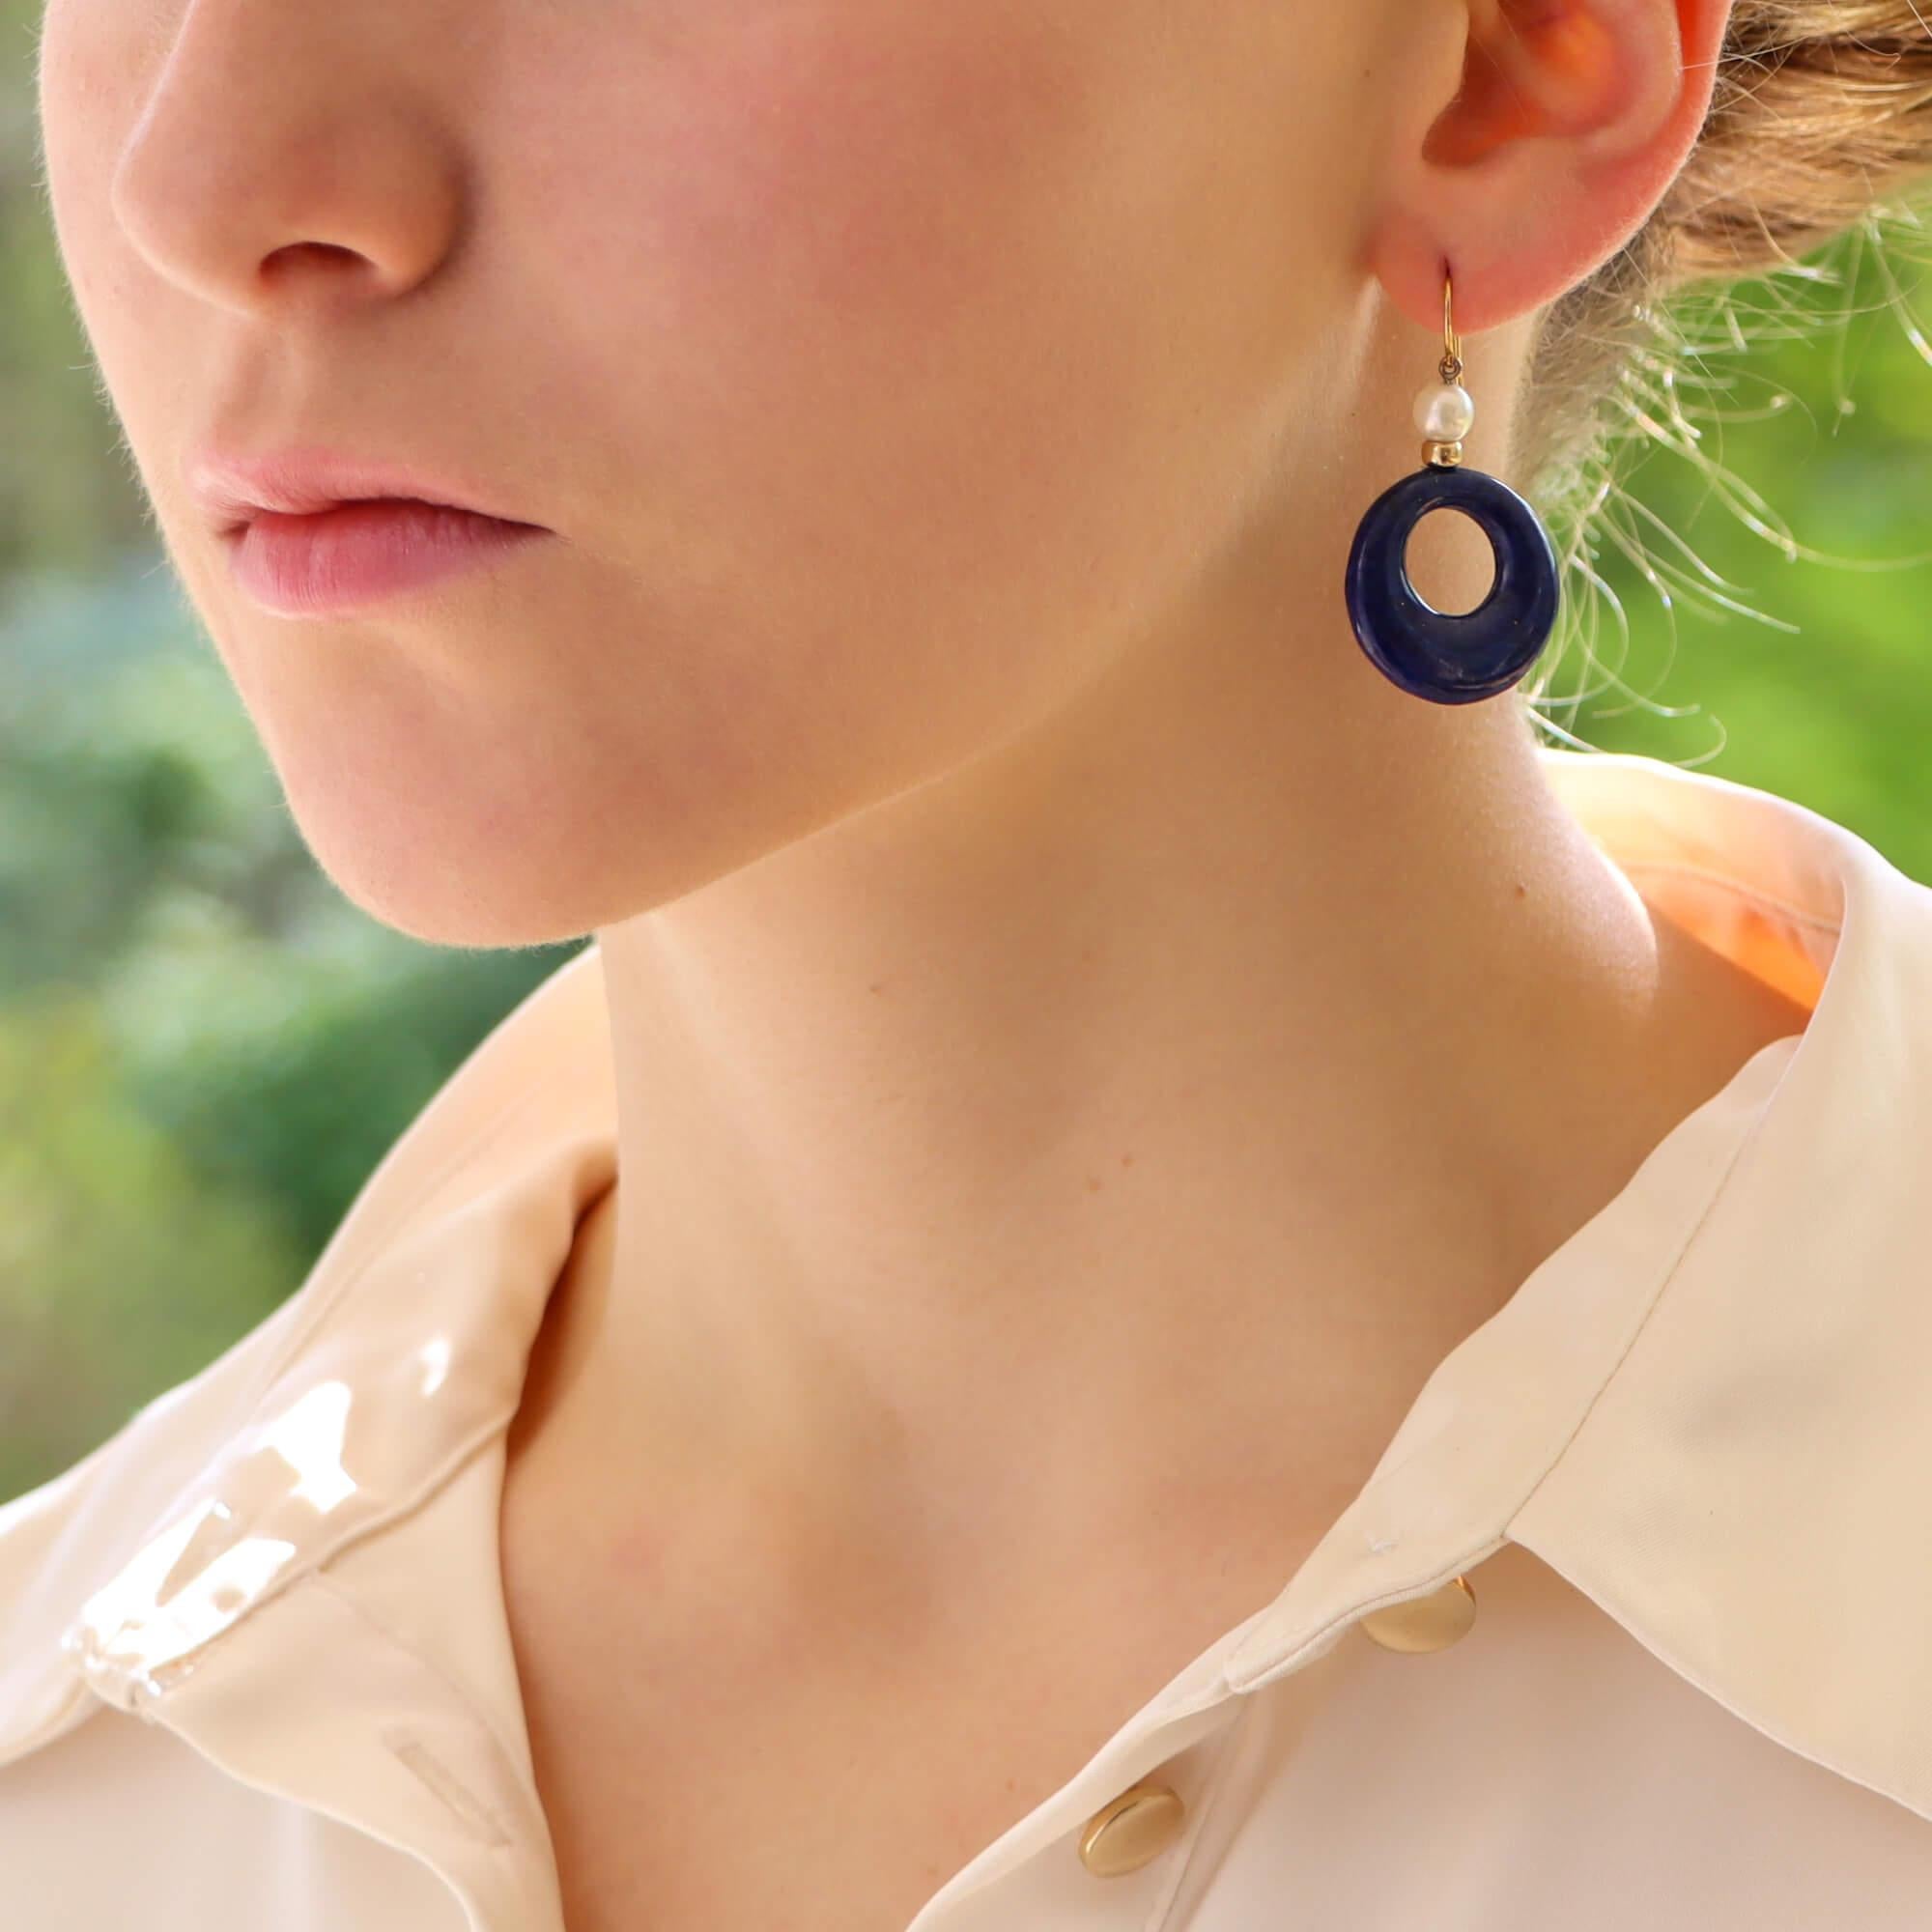  A beautiful pair of pearl and lapis lazuli drop earrings set in 18k yellow gold.

Each earring features a lustrous 6-millimetre white cultured pearl which sits perfectly next to an 18k yellow gold bead. Below this is an impressive carved piece of